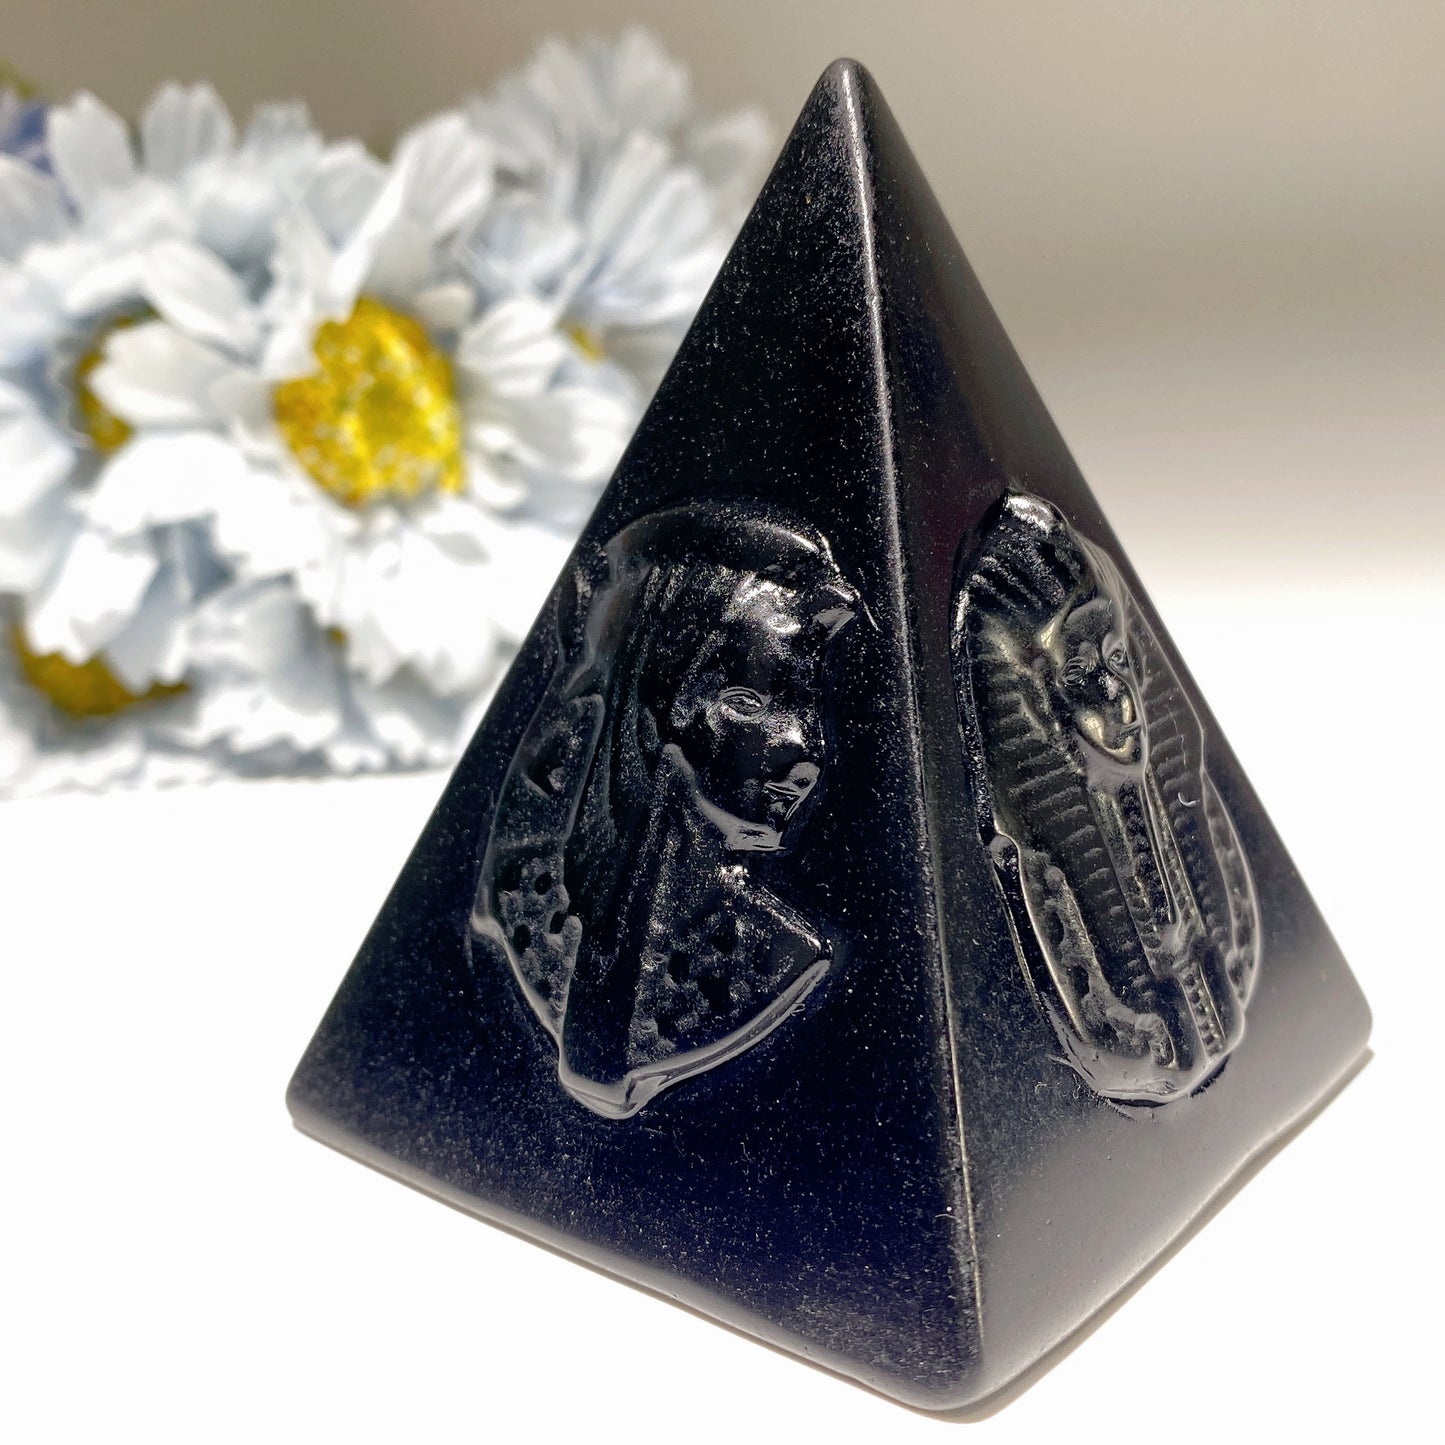 3.0" Black Obsidian Pyramid with Egypt Pattern Carvings Bulk Wholesale